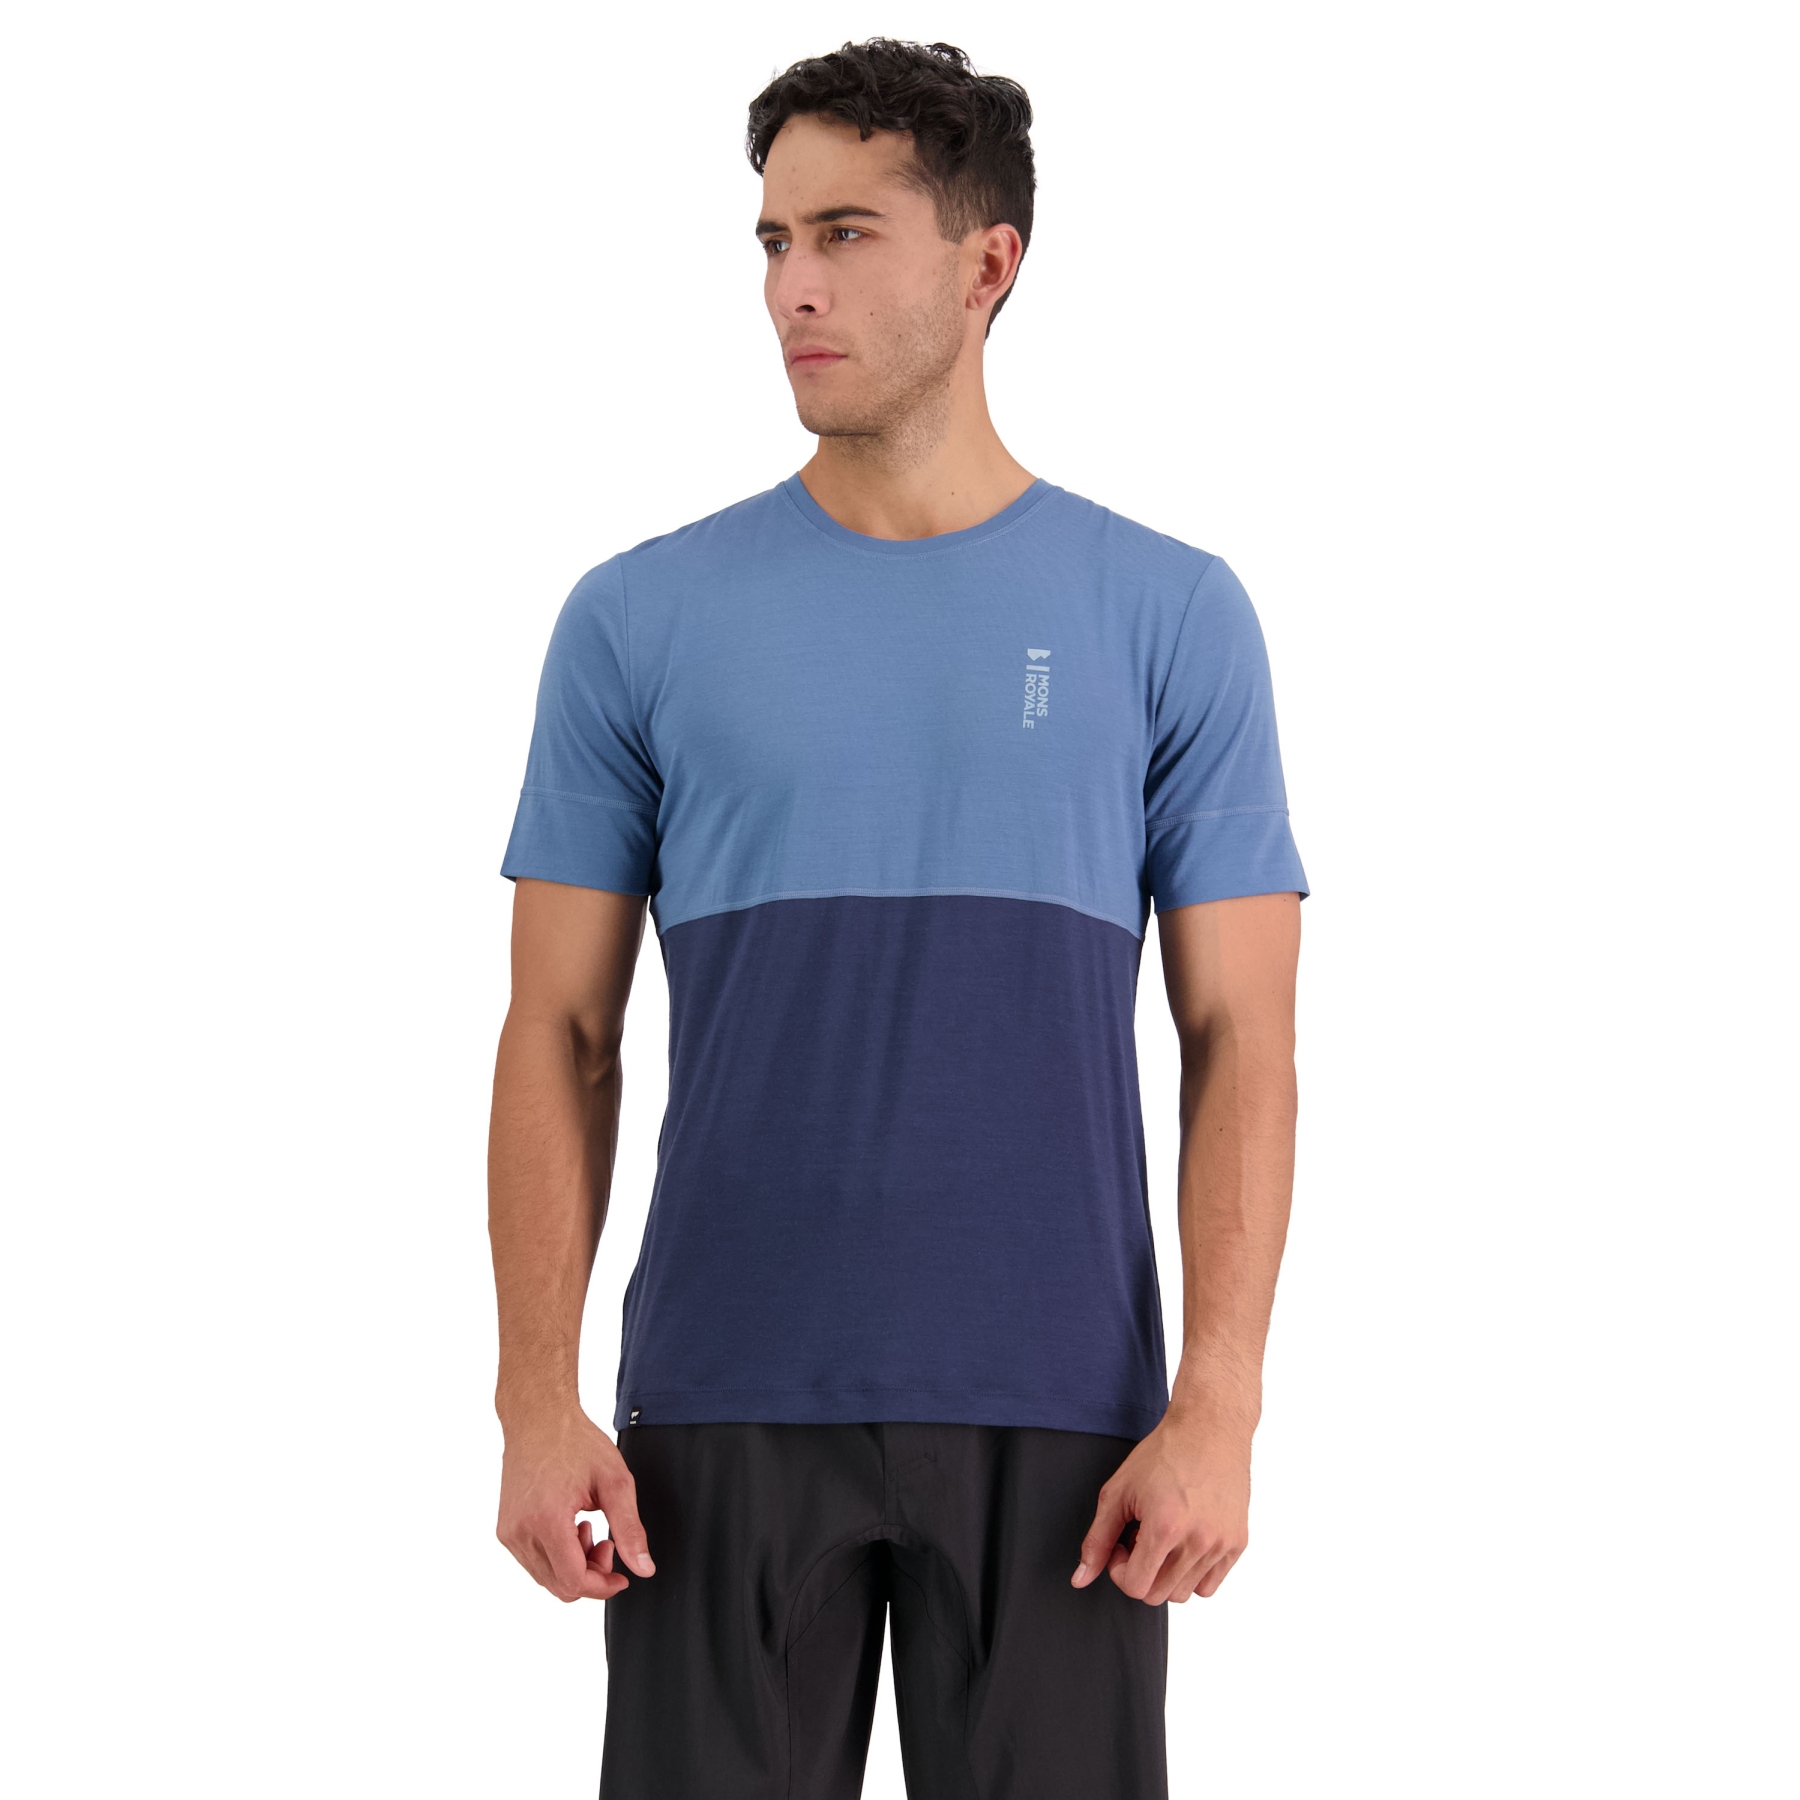 Picture of Mons Royale Cadence Tee - blue slate / midnight